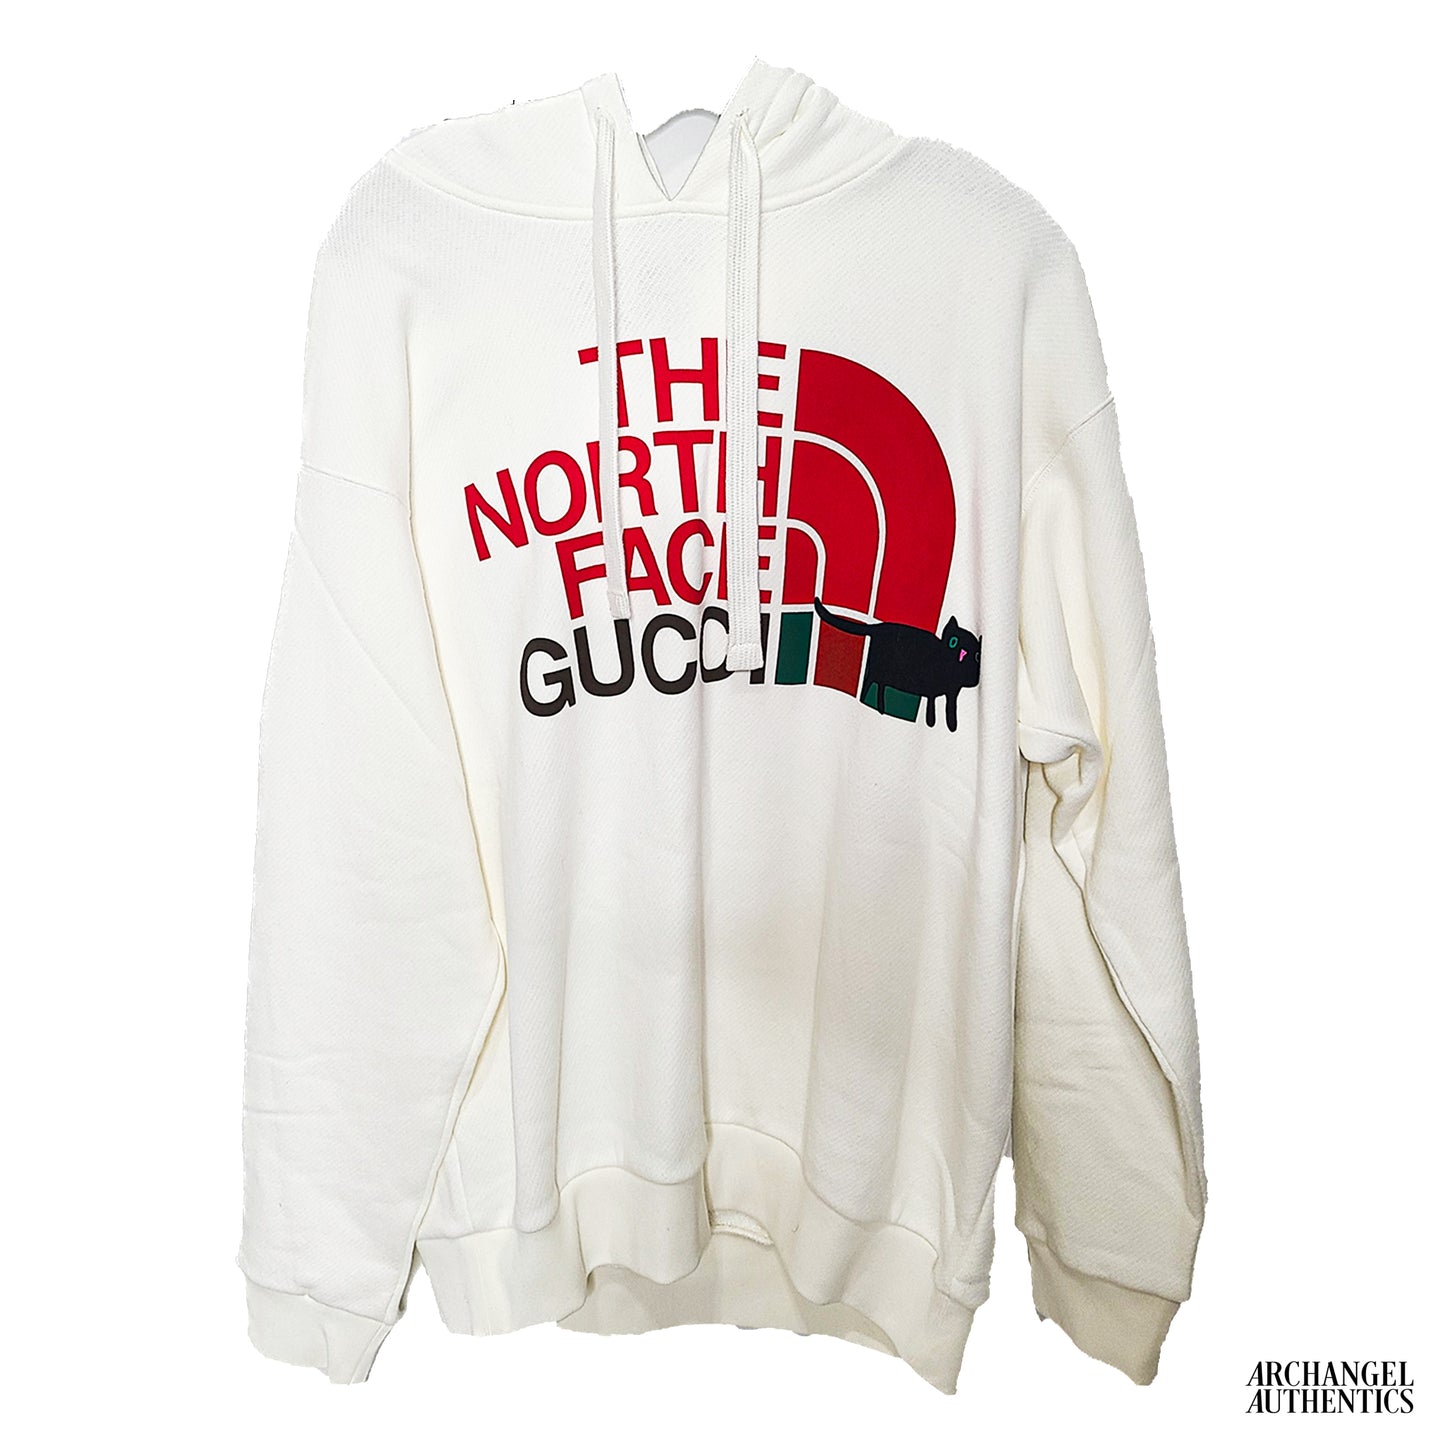 Gucci x The North Face Sweatshirt Hoodie